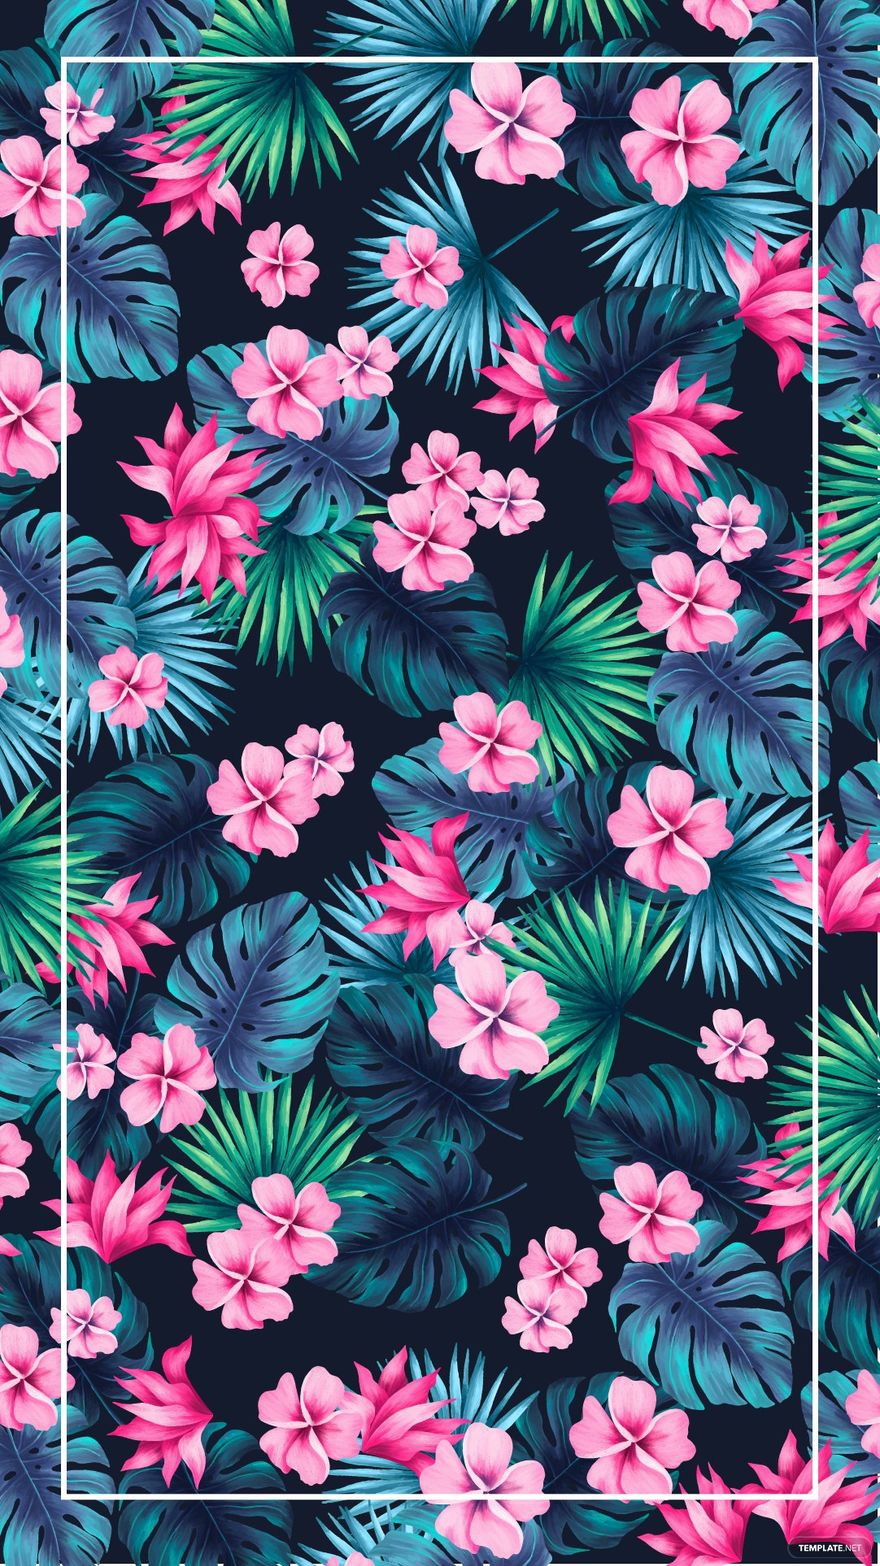 Free Tropical Floral Watercolor Background in Illustrator, EPS, SVG, JPG